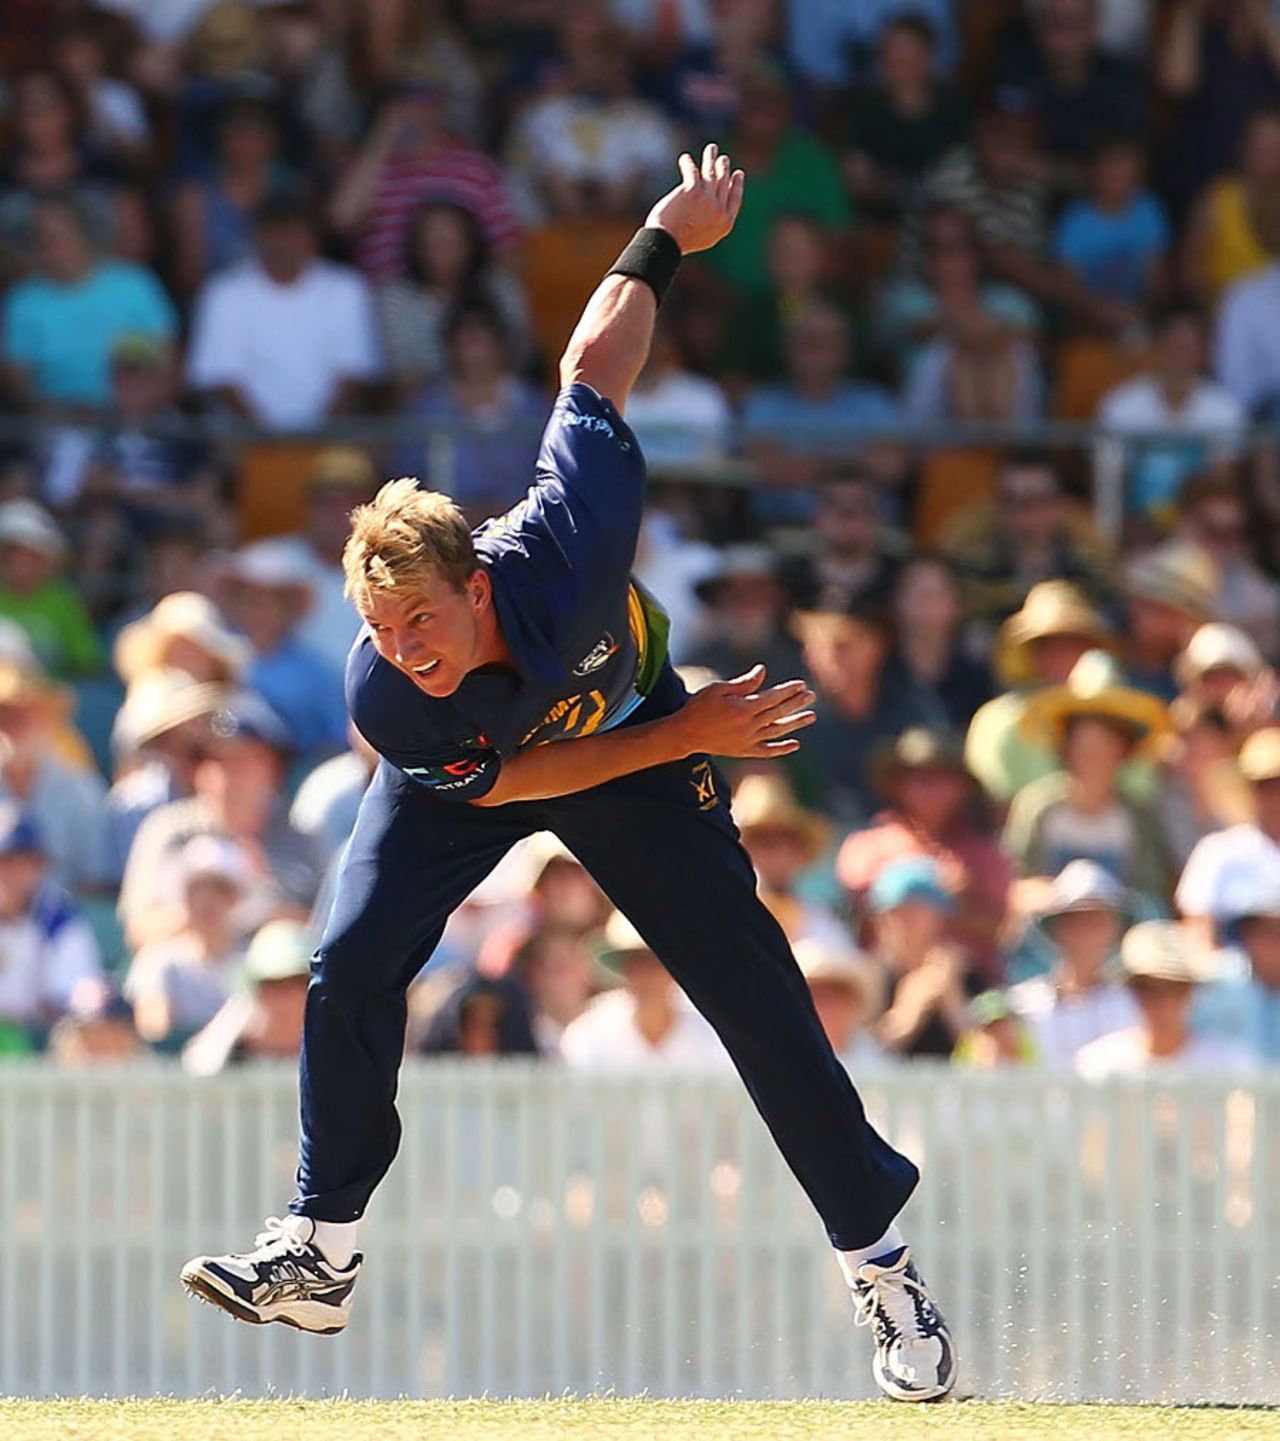 Brett Lee claimed two early wickets, Prime Minister's XI v England XI, Tour match, Canberra, January 14, 2014